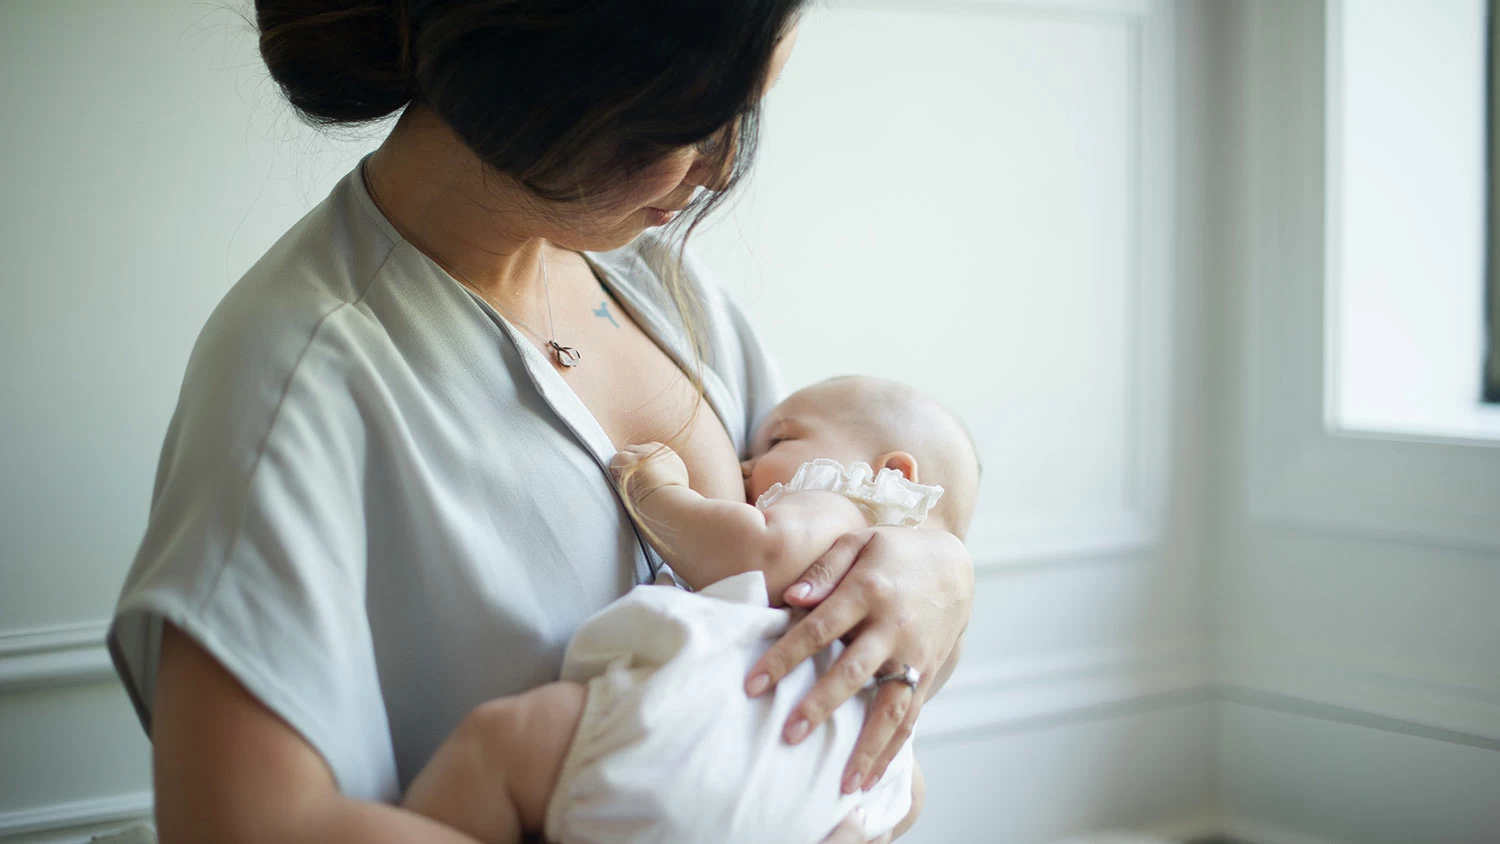 Breastfeeding Positions That Work for Mom and Baby